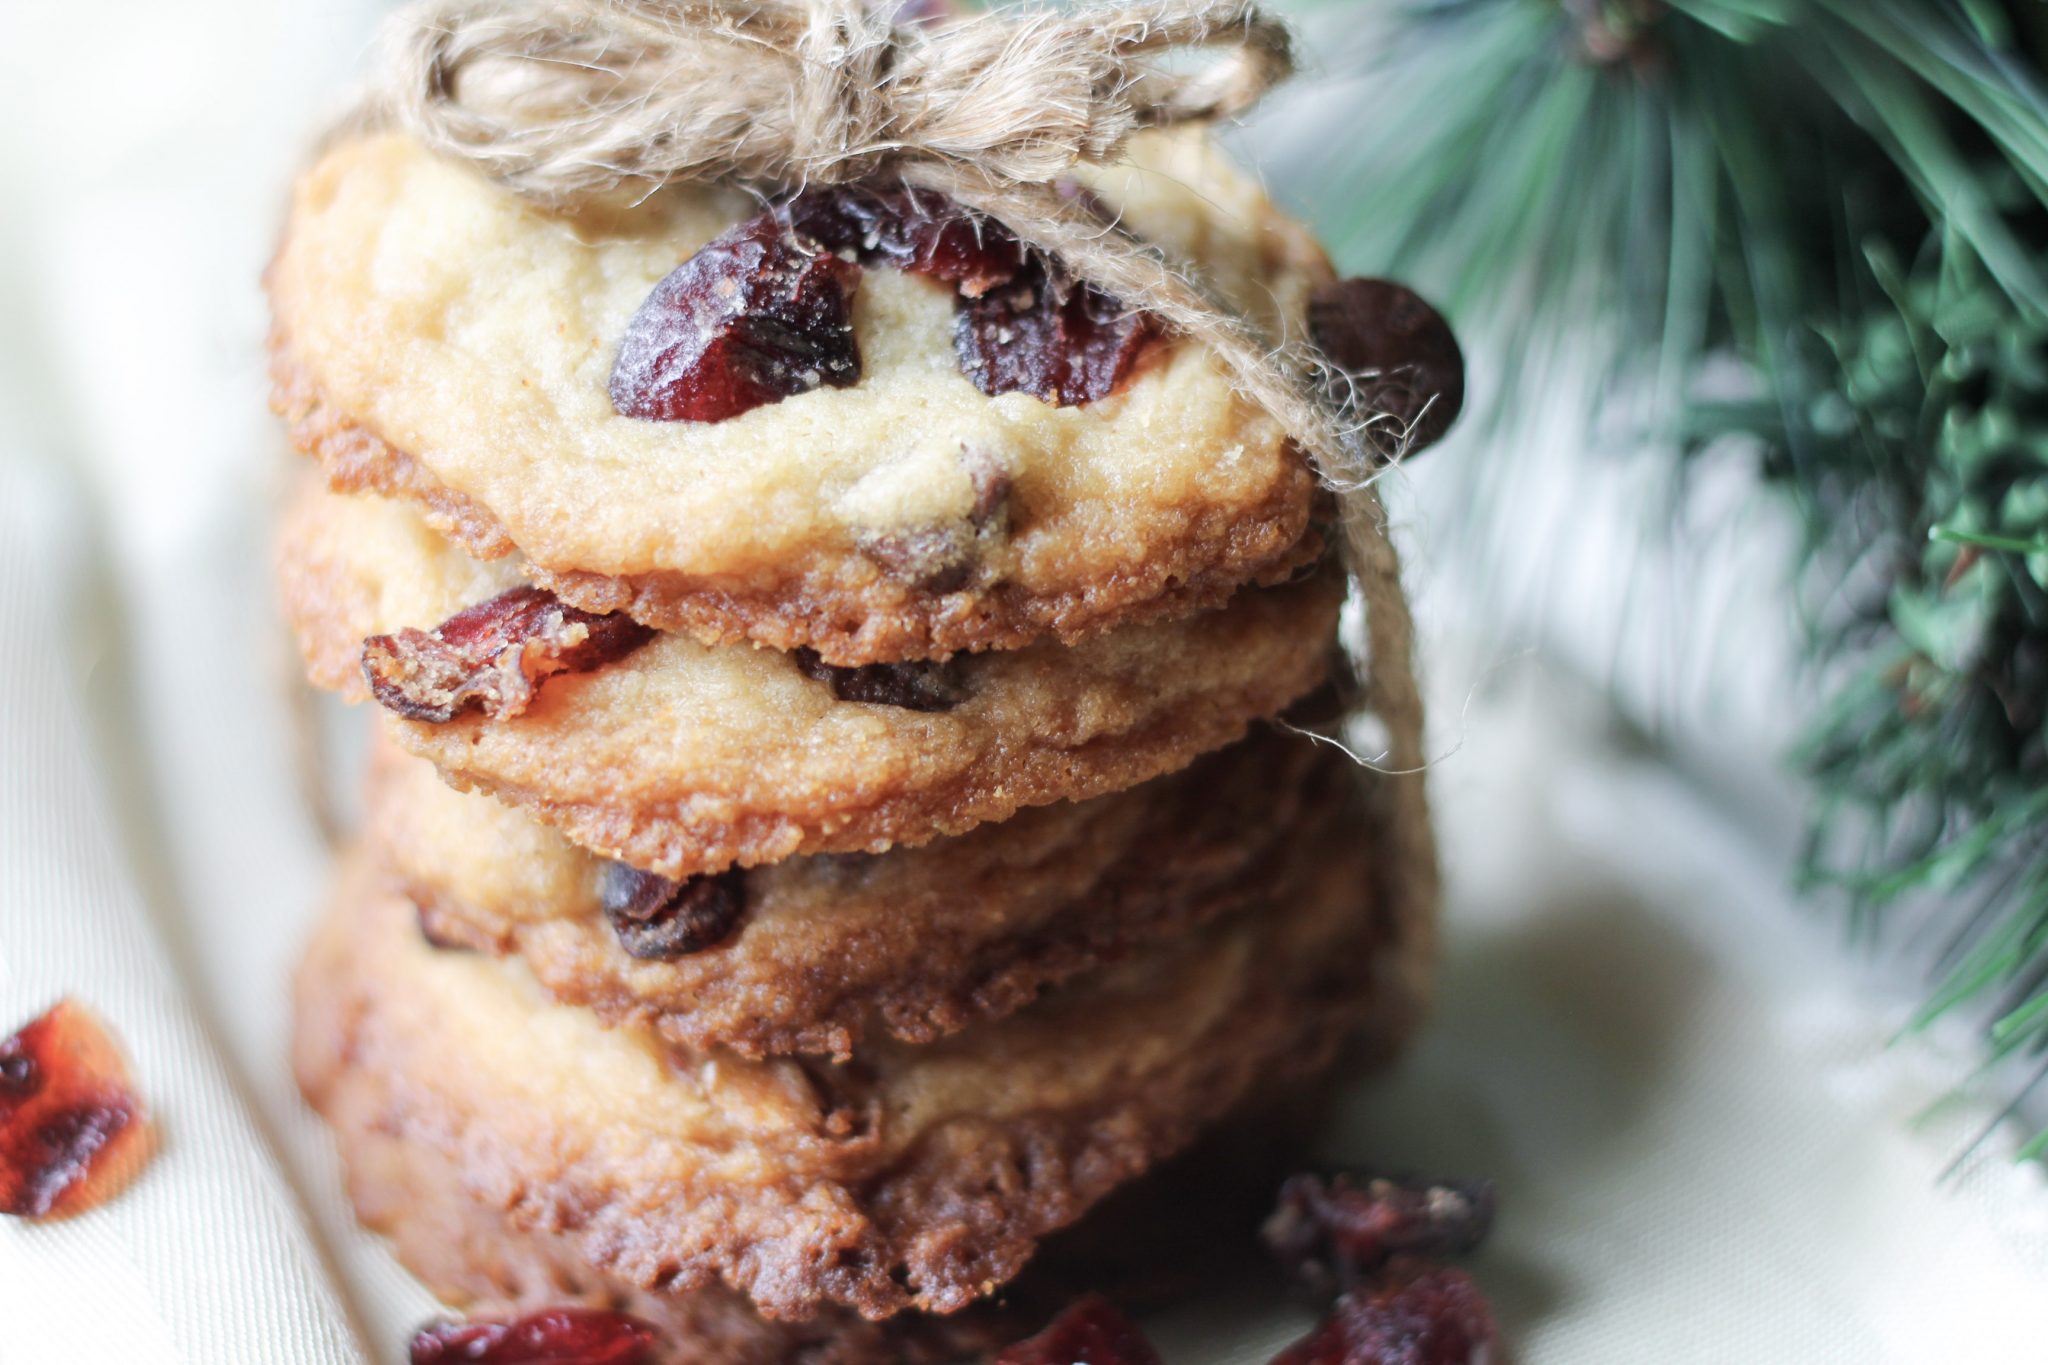 Cranberry and Almond cookies photo to give as gifts